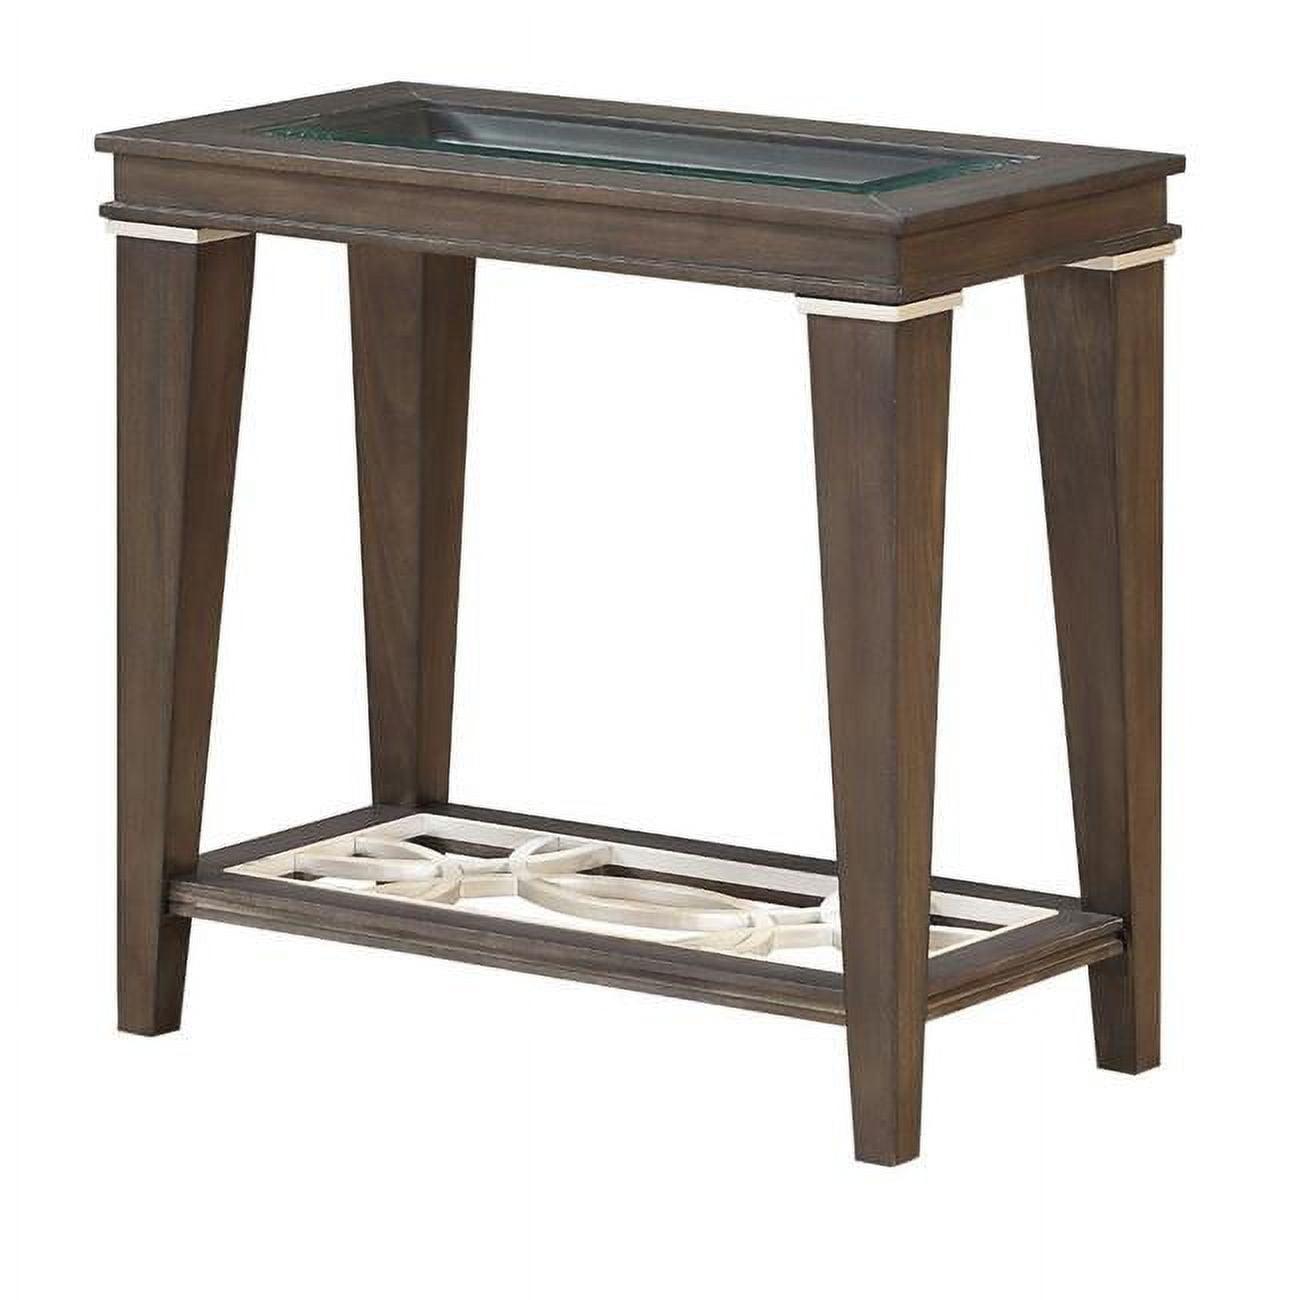 Peregrine Dark Brown Wooden Side Table with Glass Top and Cloverleaf Motif